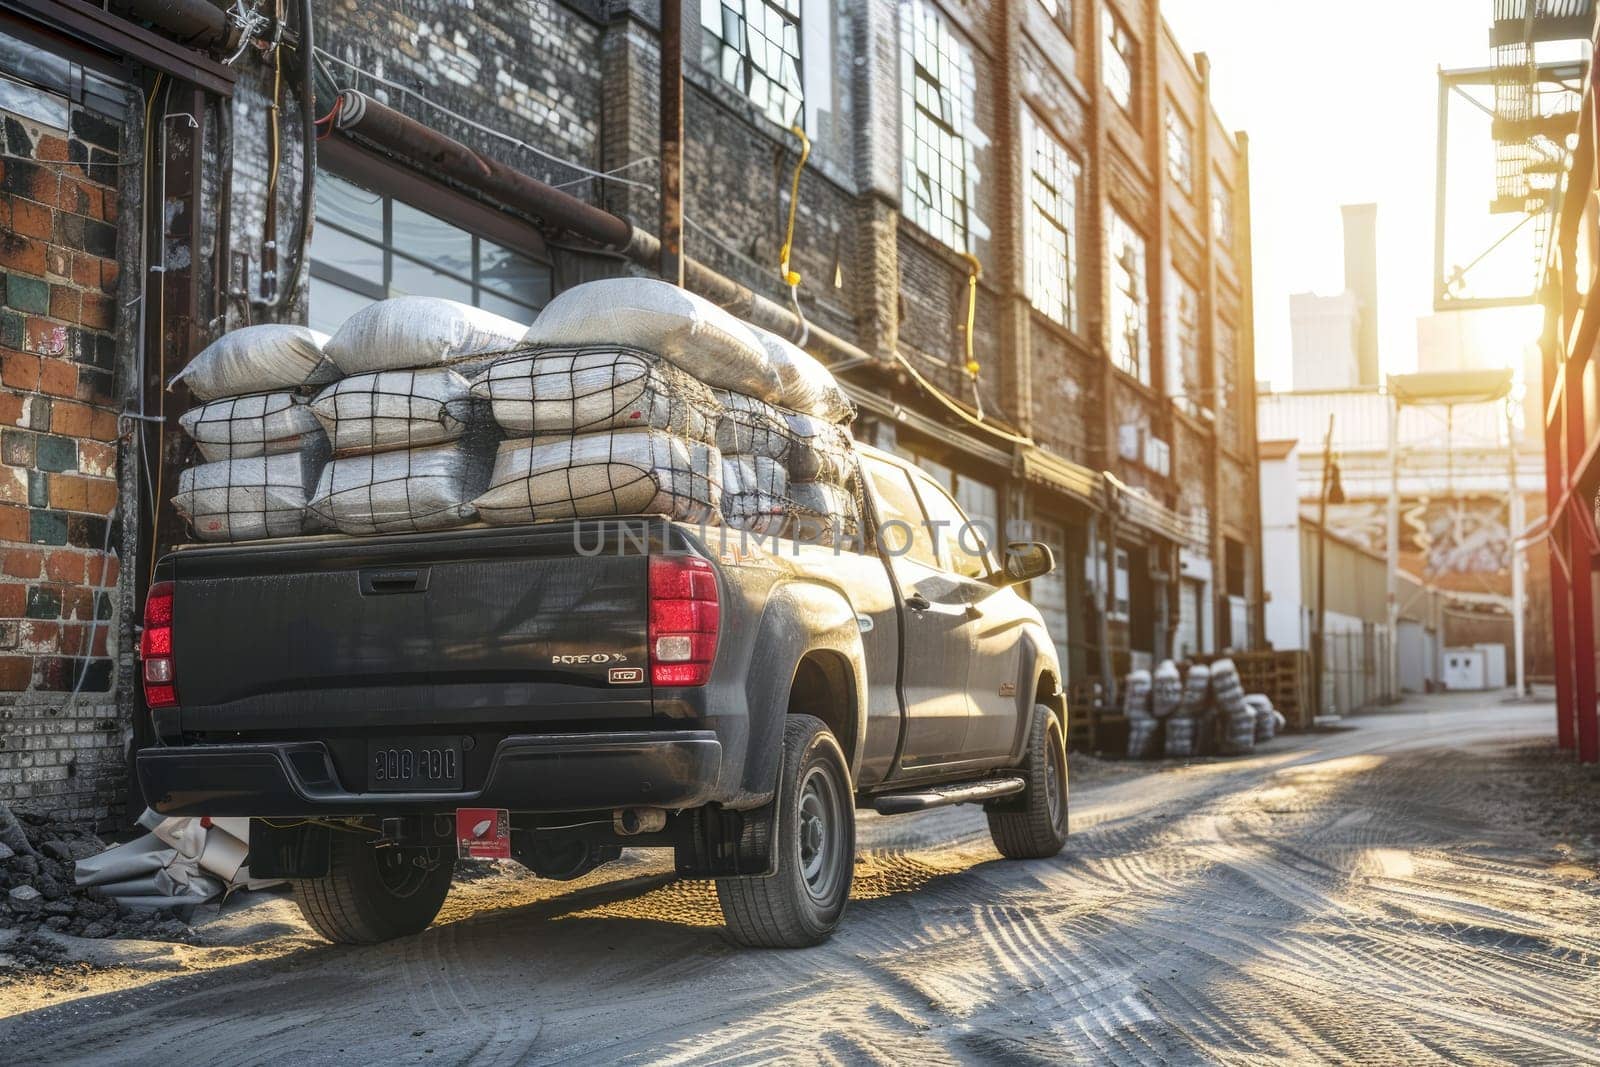 A pickup truck loaded with cargo in an industrial setting. by Chawagen